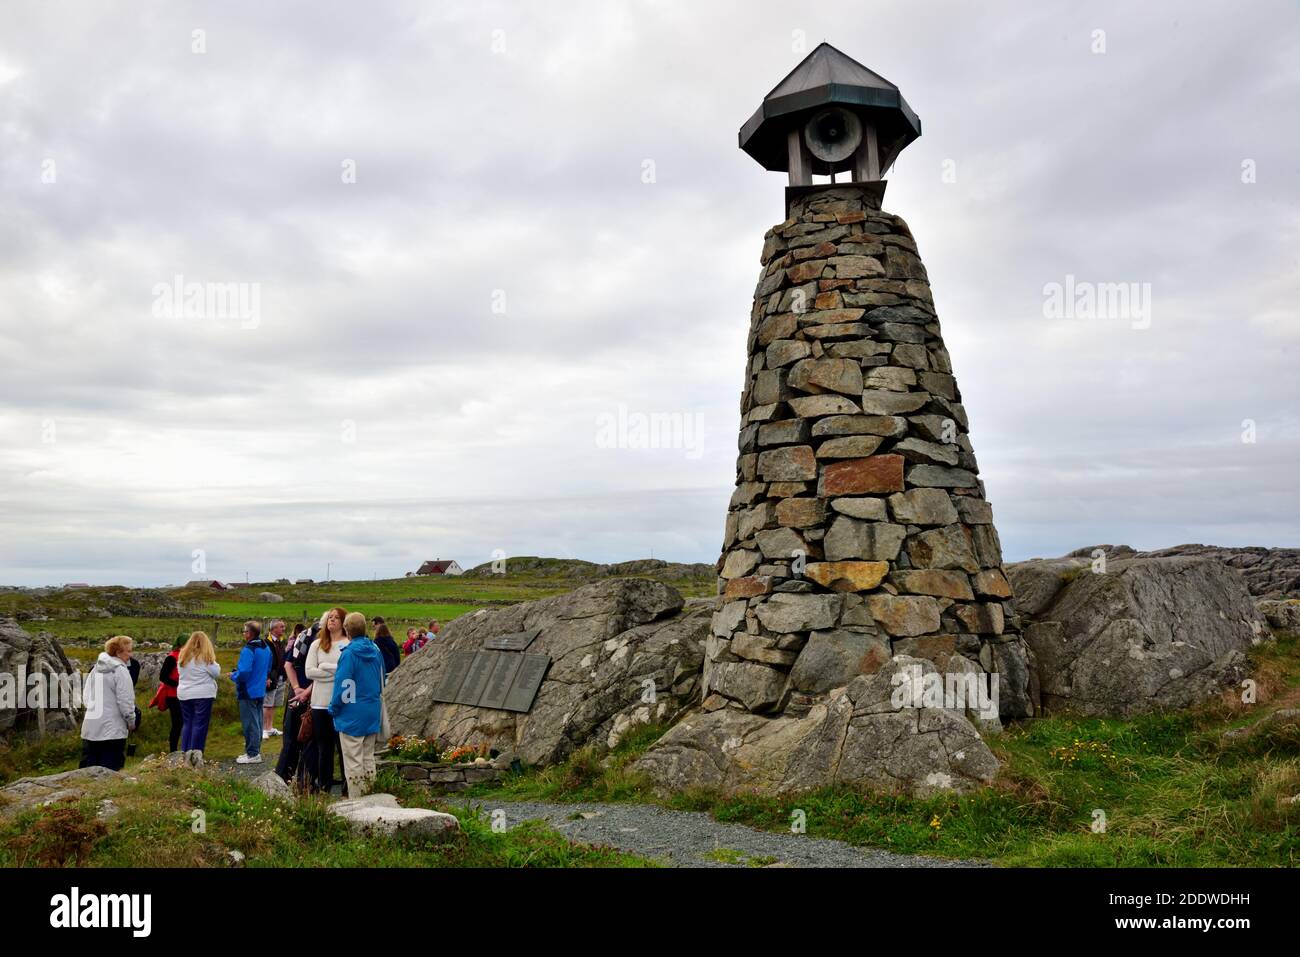 Sightseers at the Fishermen's Memorial at Ferkingstad, Karmoy, Norway, which commemorates the lives of fishermen lost in American waters. Stock Photo